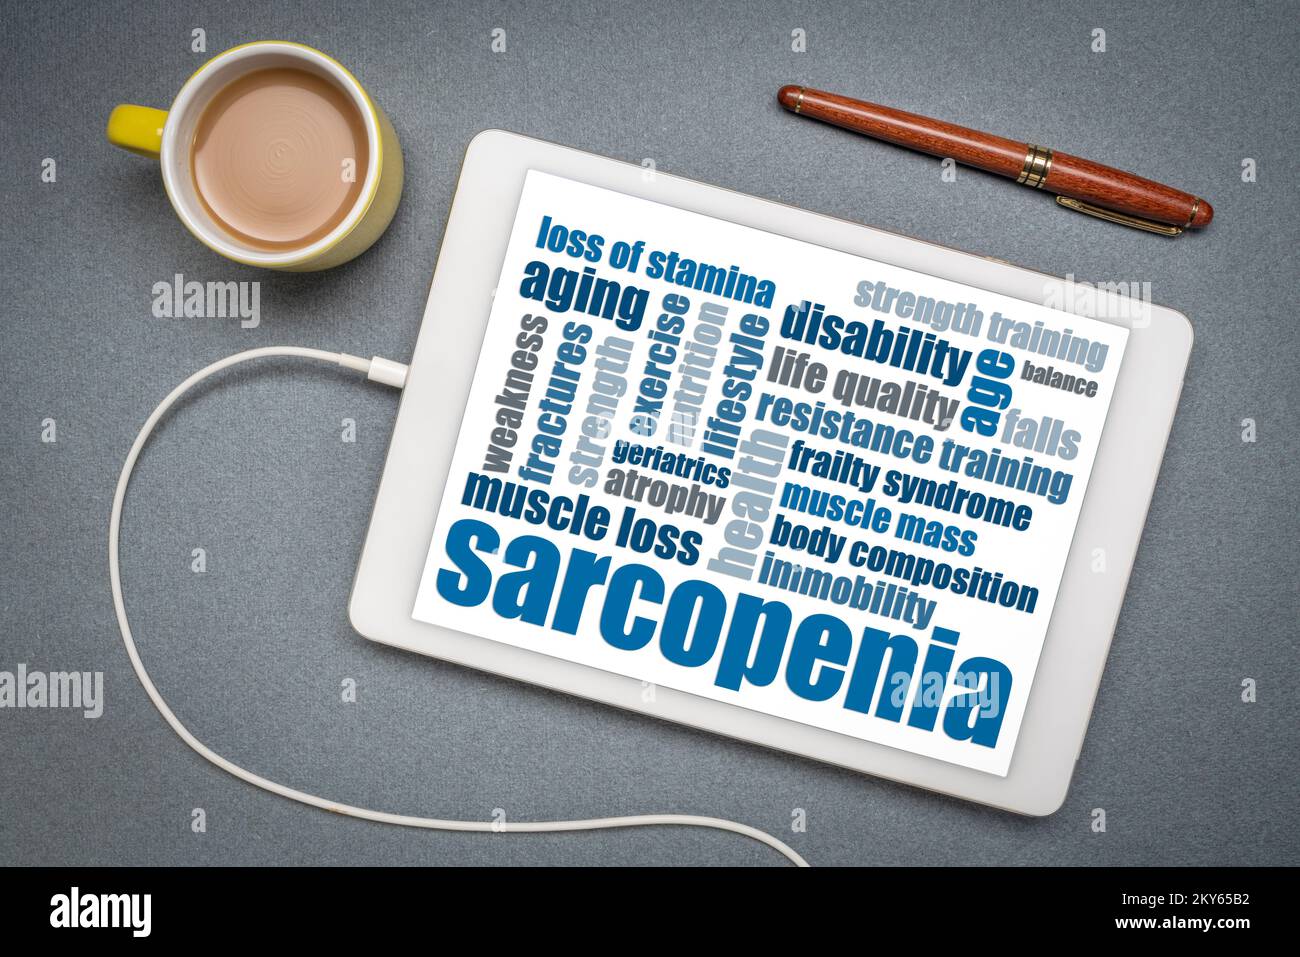 sarcopenia - muscle loss due to aging, word cloud on a digital tablet, health and senior fitness concept Stock Photo